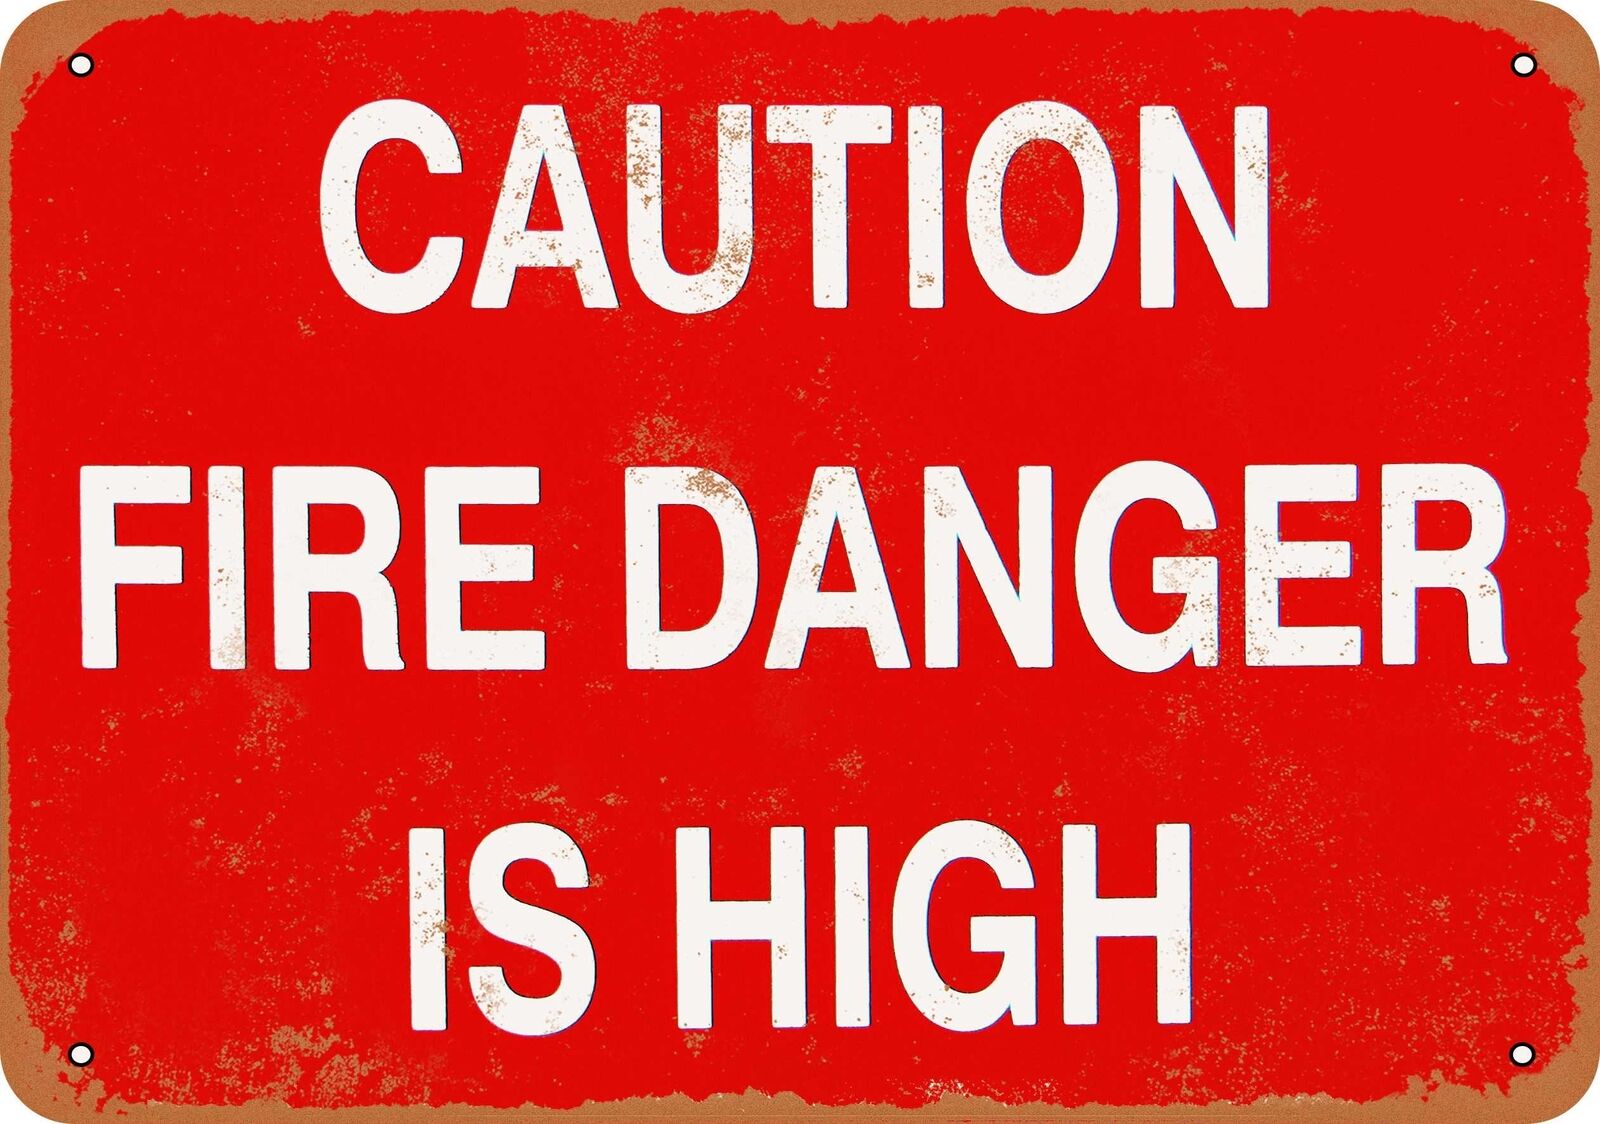 Metal Sign - Caution Fire Danger is High - Vintage Look Reproduction